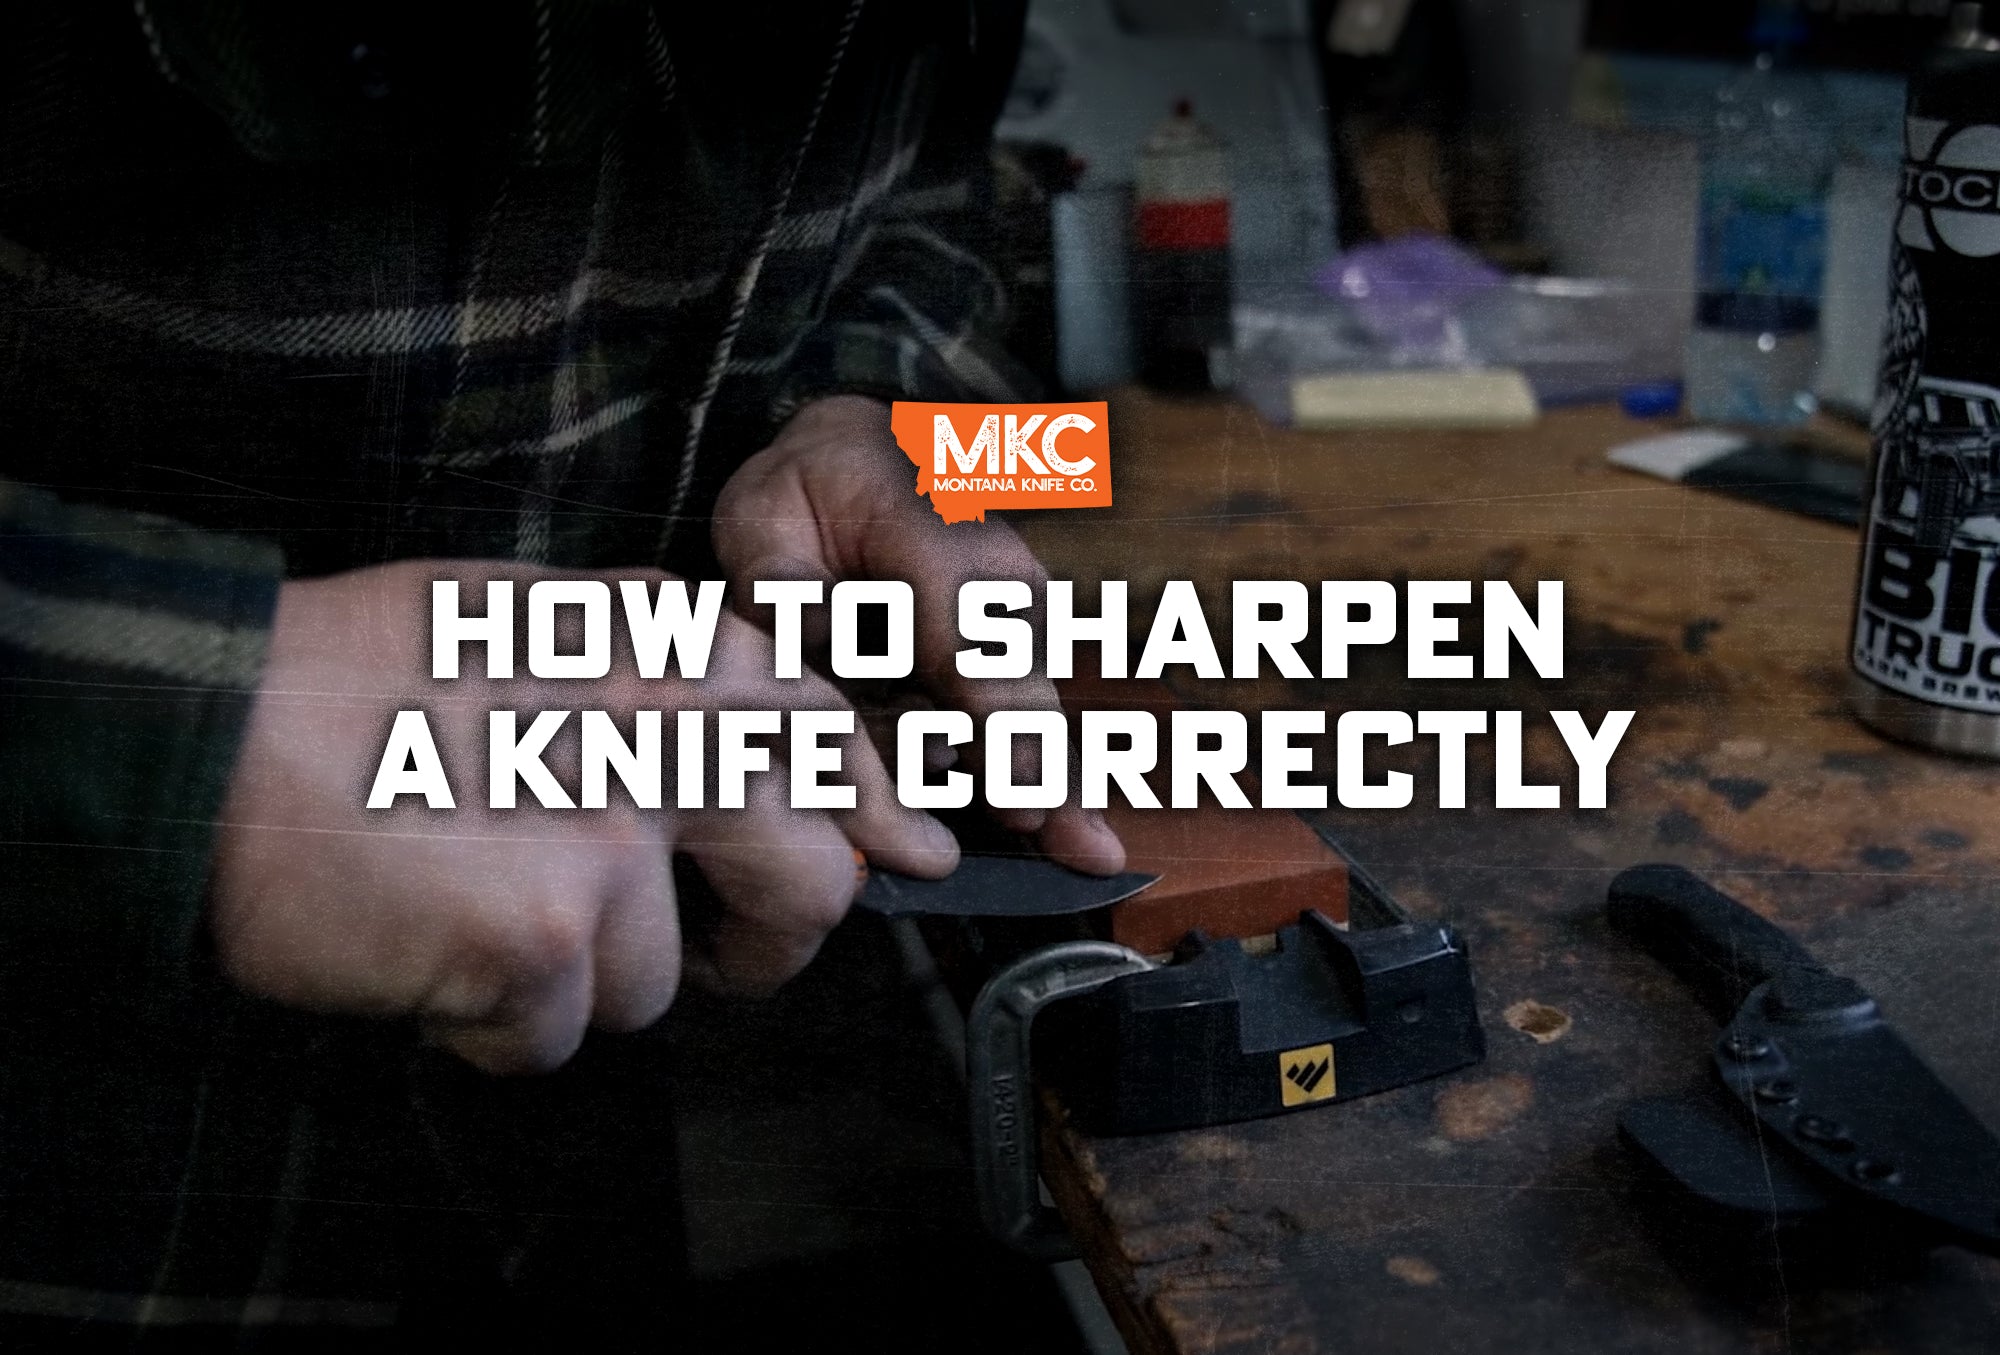 How to use Knife Sharpener correctly?